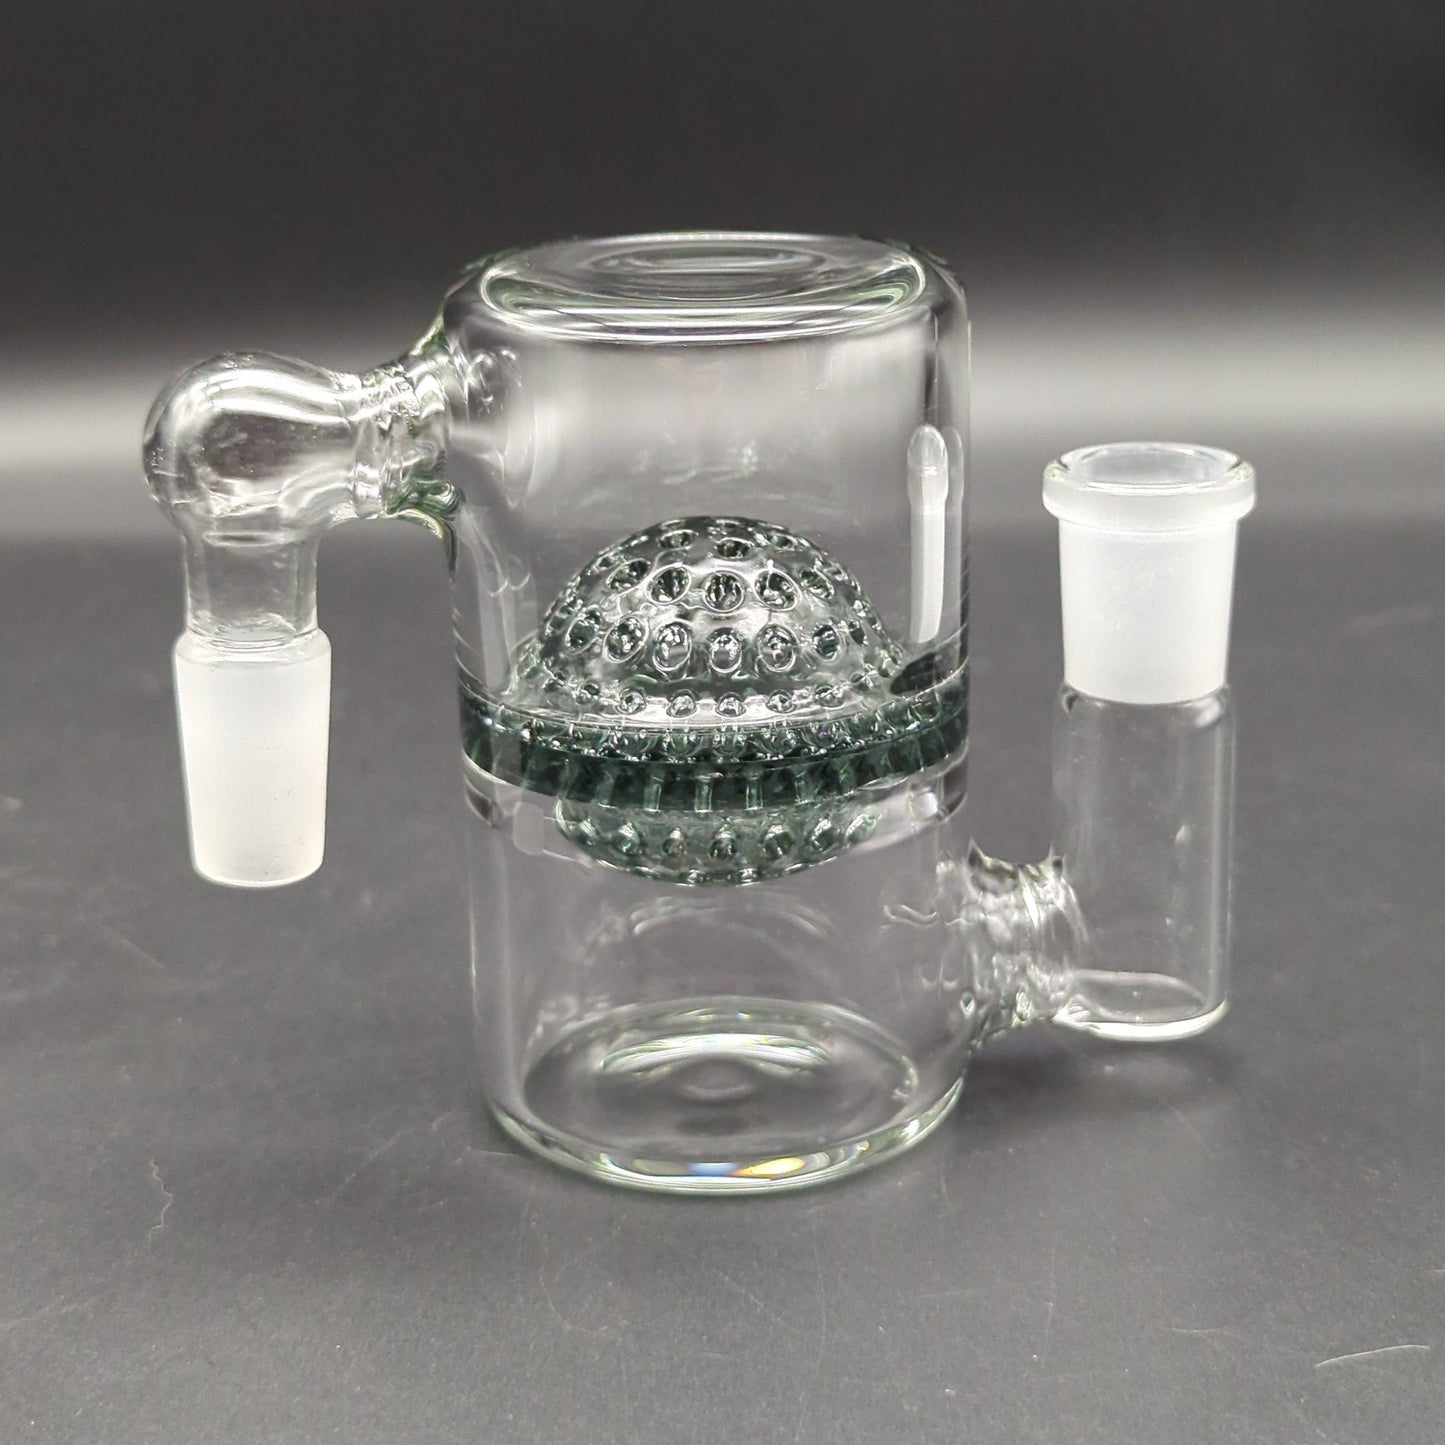 Netted Disc Wet Ash Catcher 14mm 90 Degrees smoke